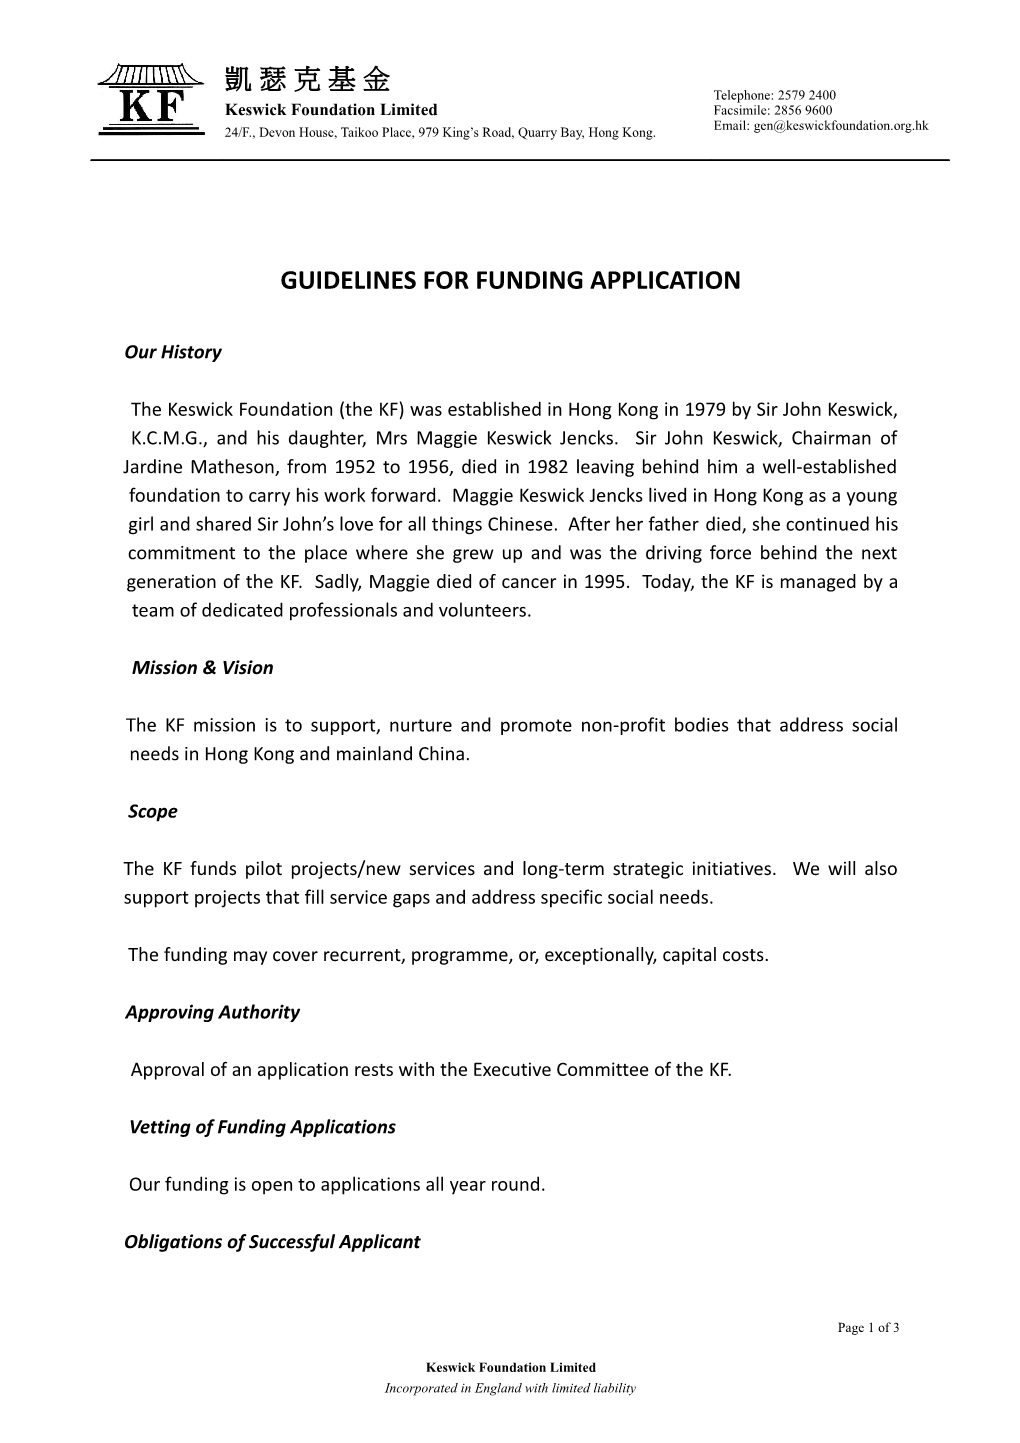 Guide to Application of Funding